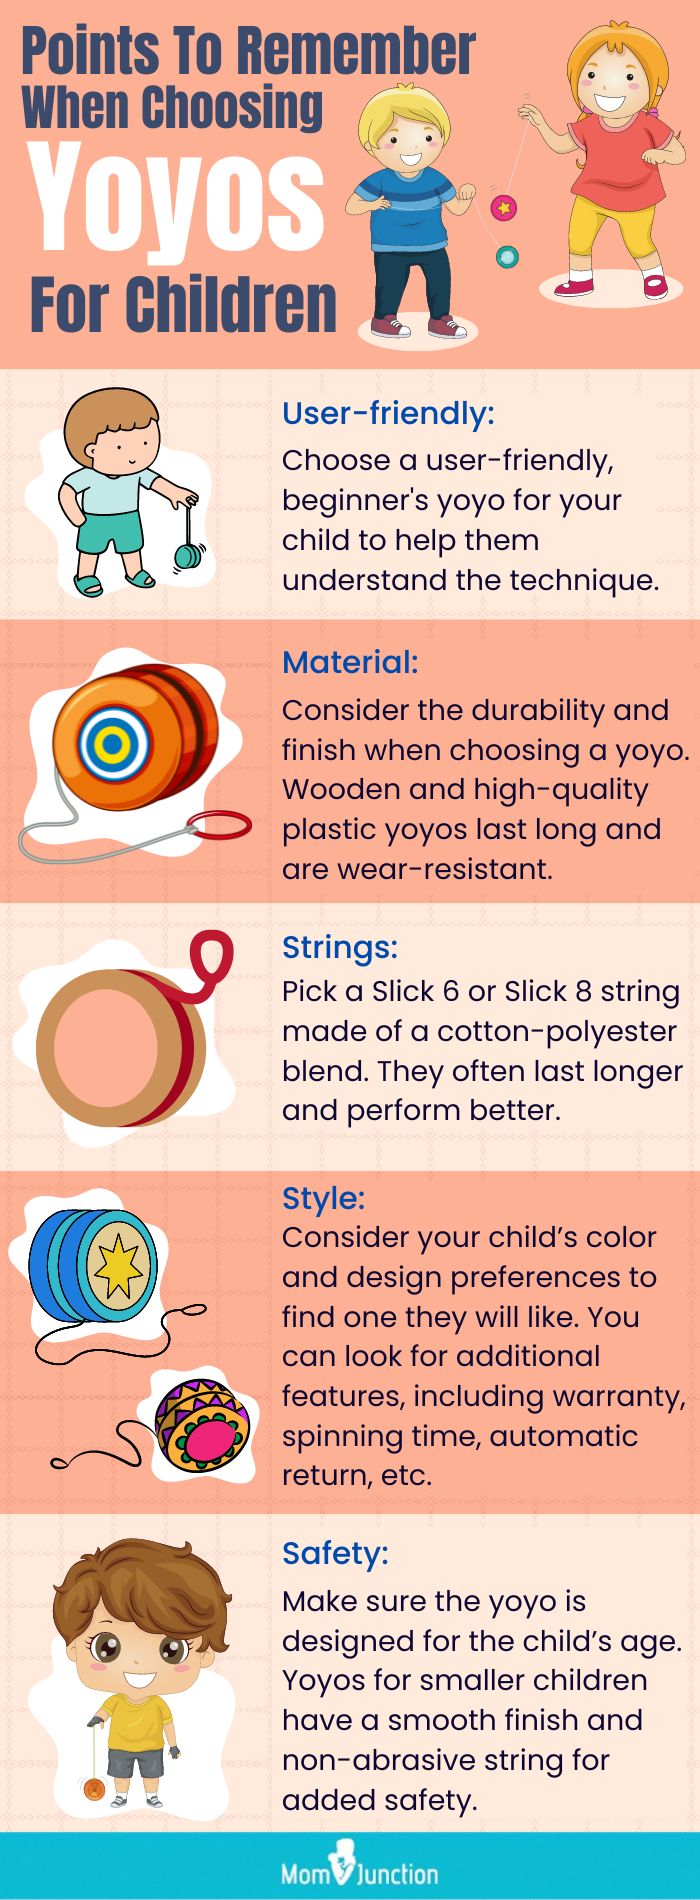 Points To Remember When Choosing Yoyos For Children (infographic)